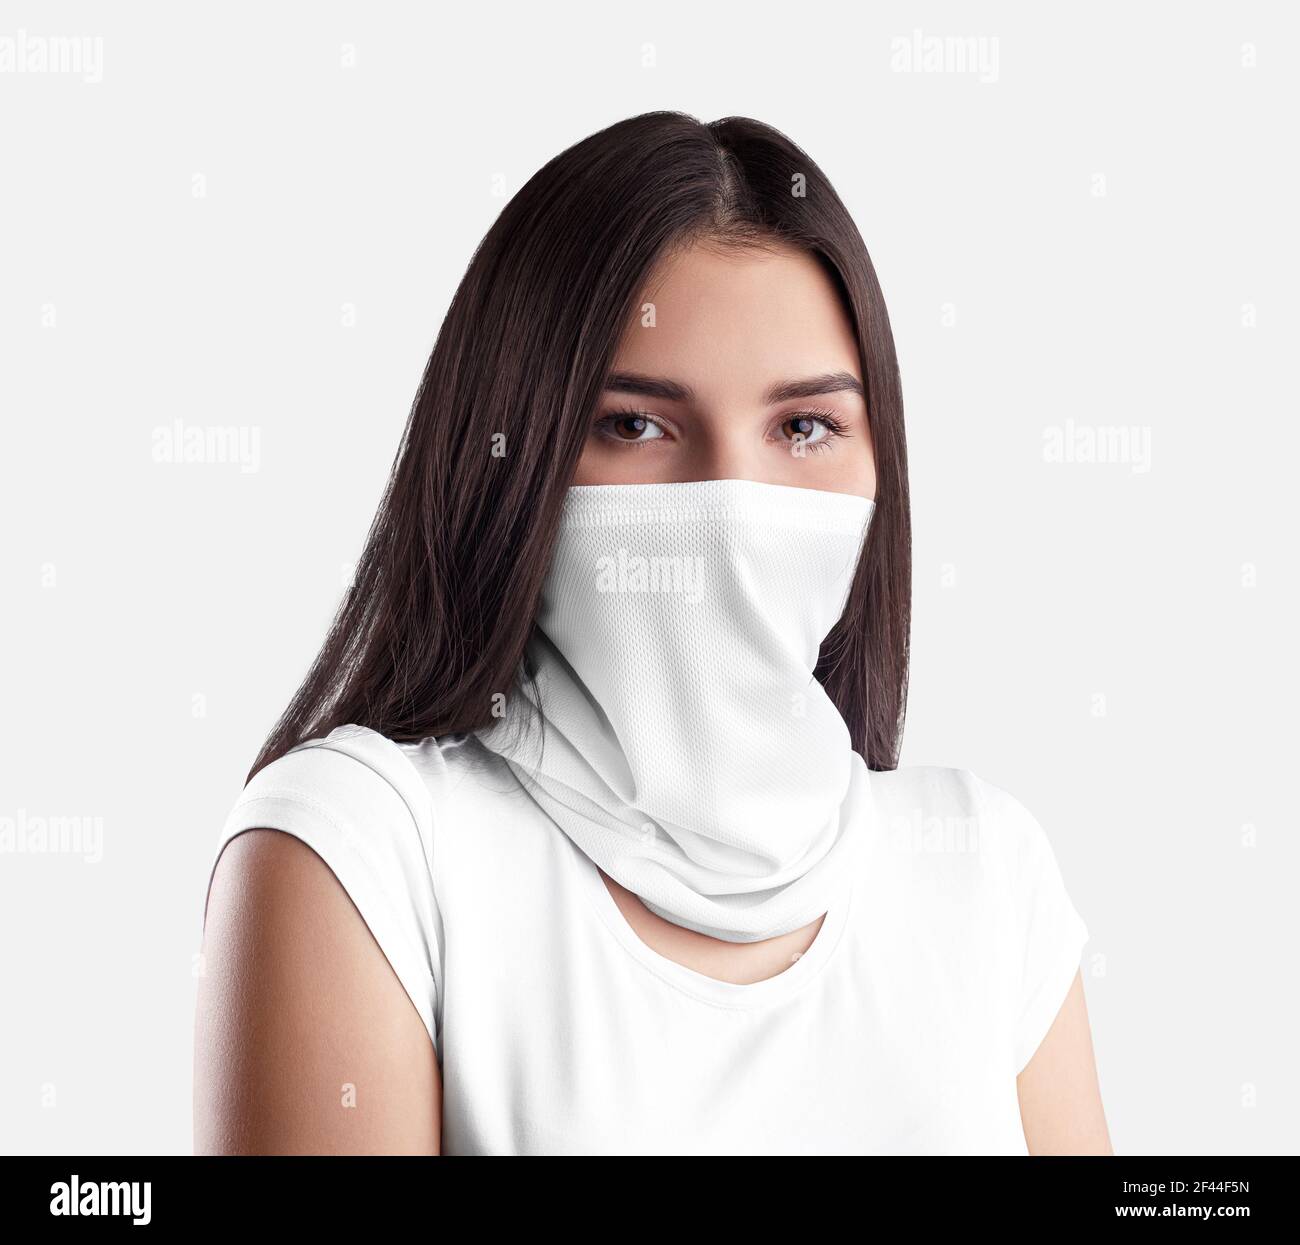 White buff template on a girl with beautiful dark eyes and hair, textured scarf covering her face, isolated on background. Blank half mask mockup for Stock Photo